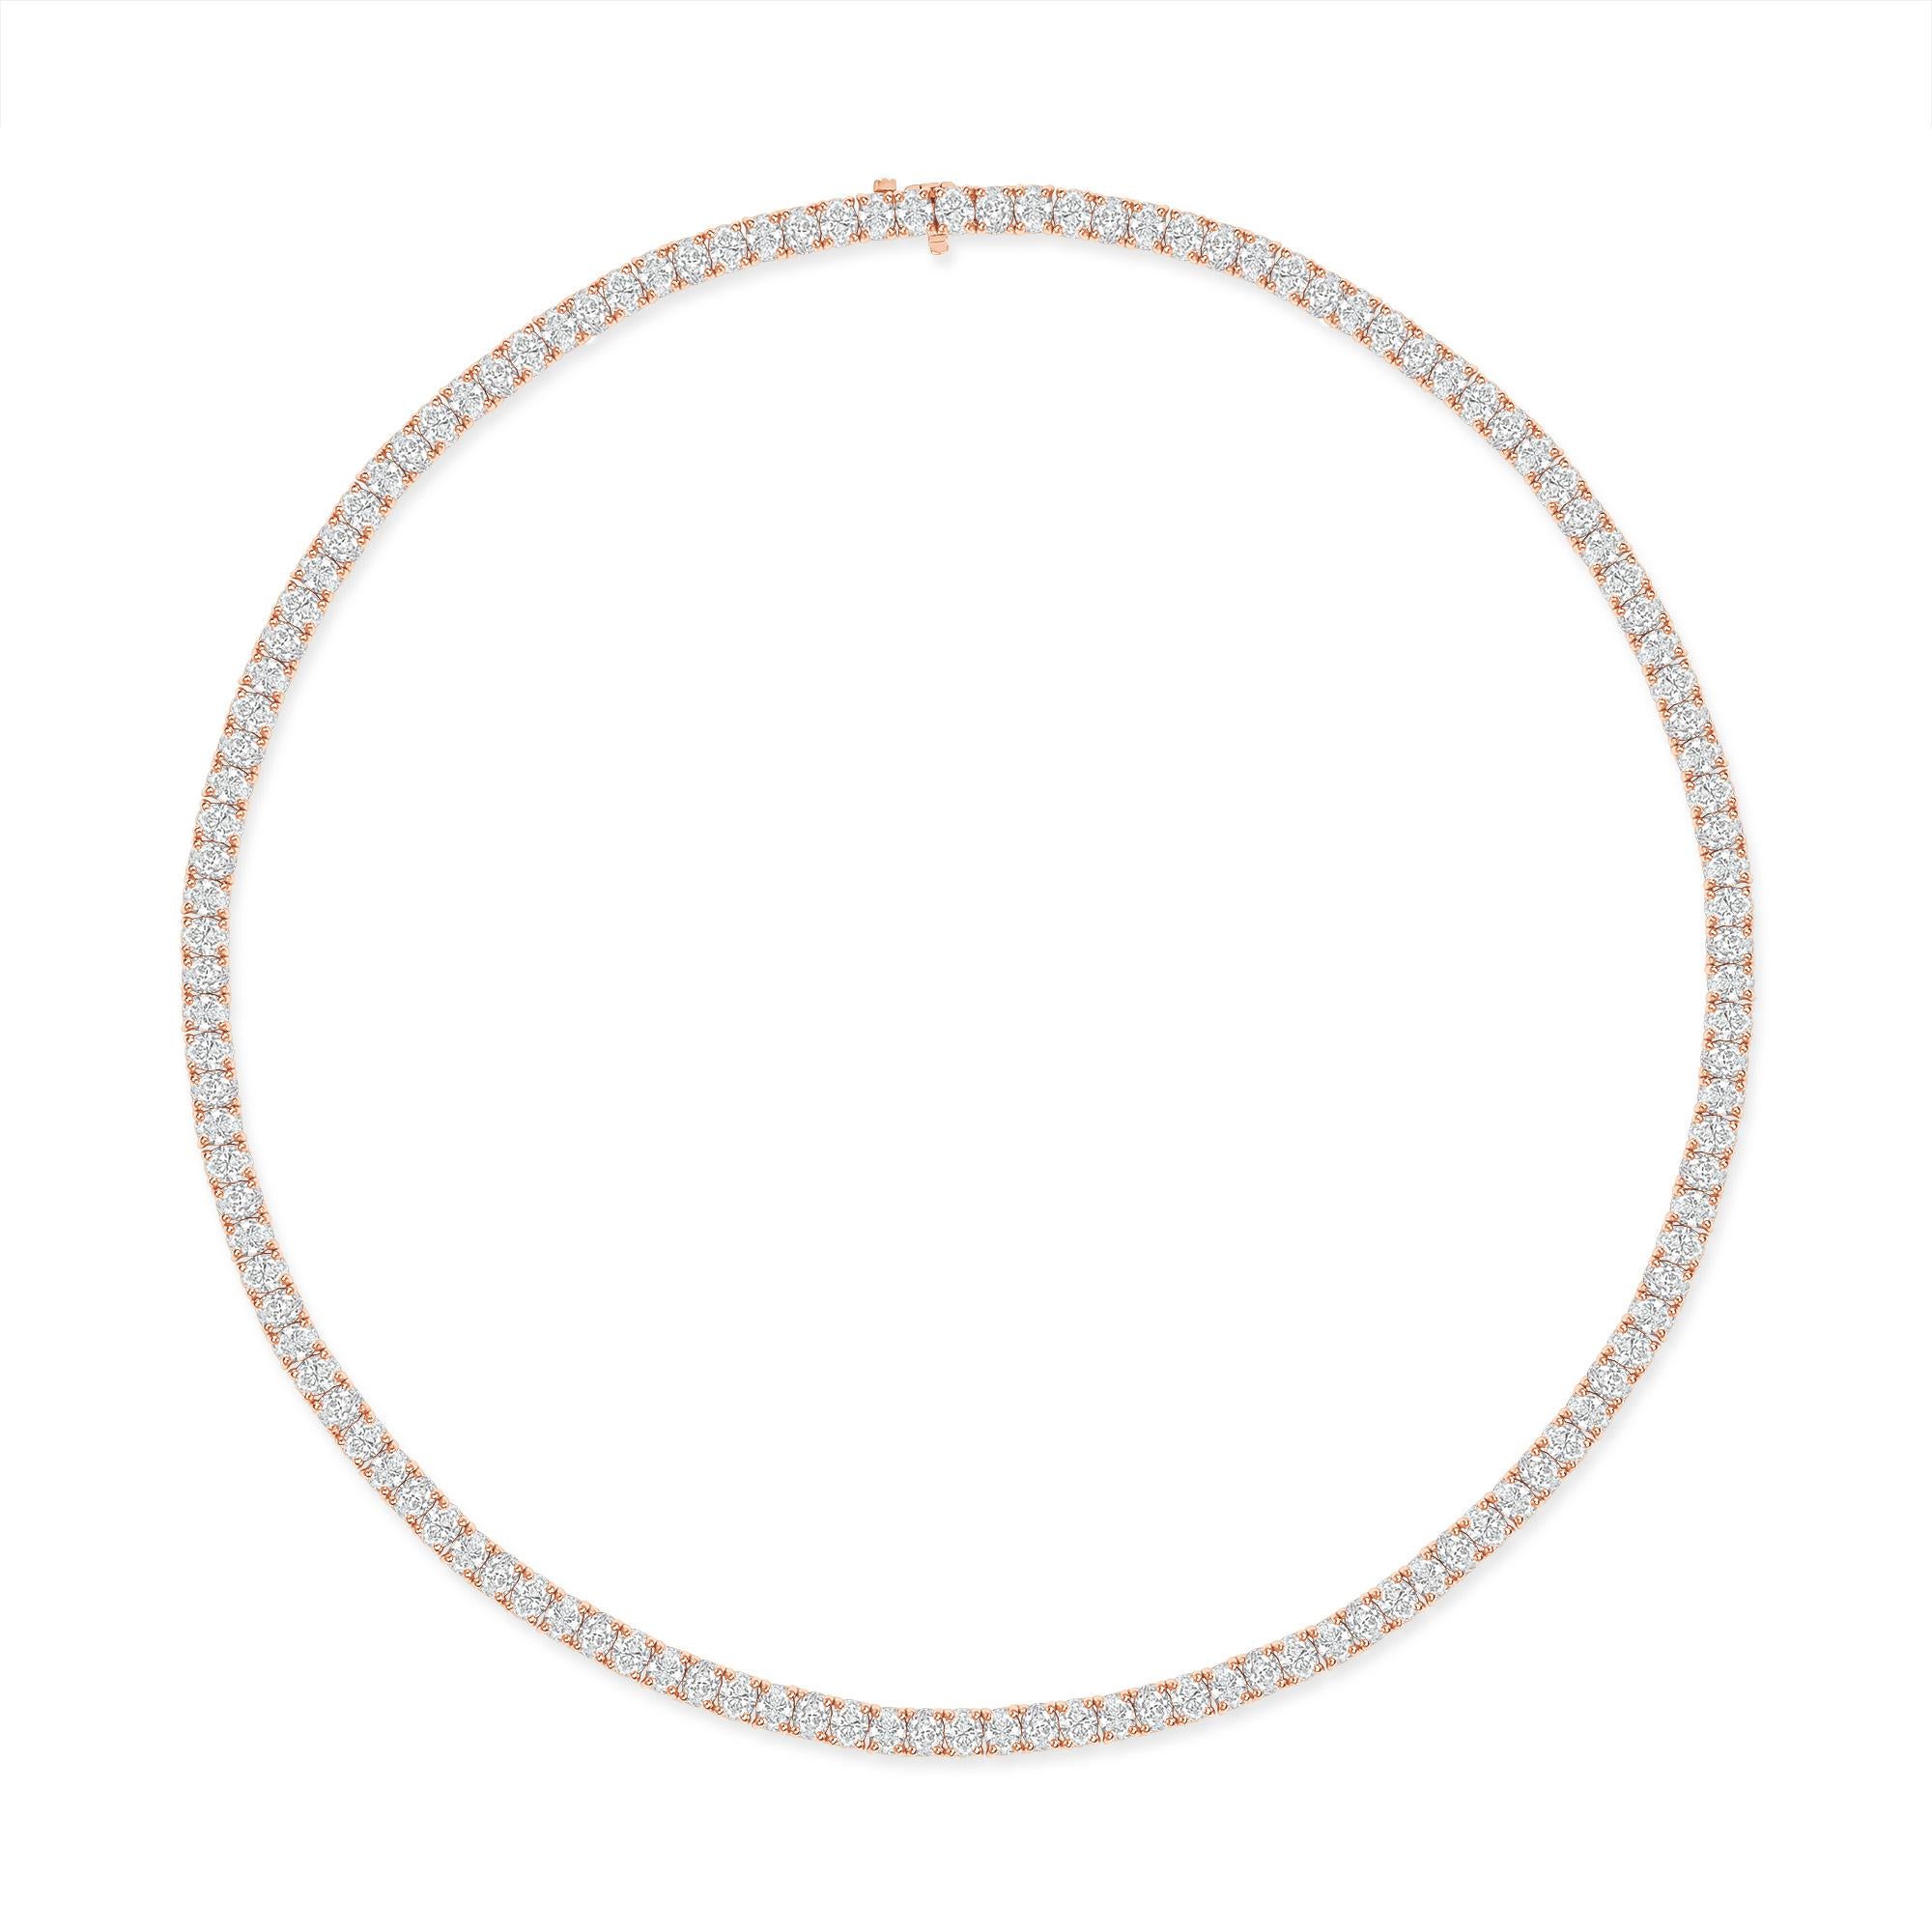 20ct Oval Tennis Necklace, Natural Diamonds (F-G, VS-SI1) in 16 Inches 18k Gold In New Condition For Sale In Los Angeles, CA